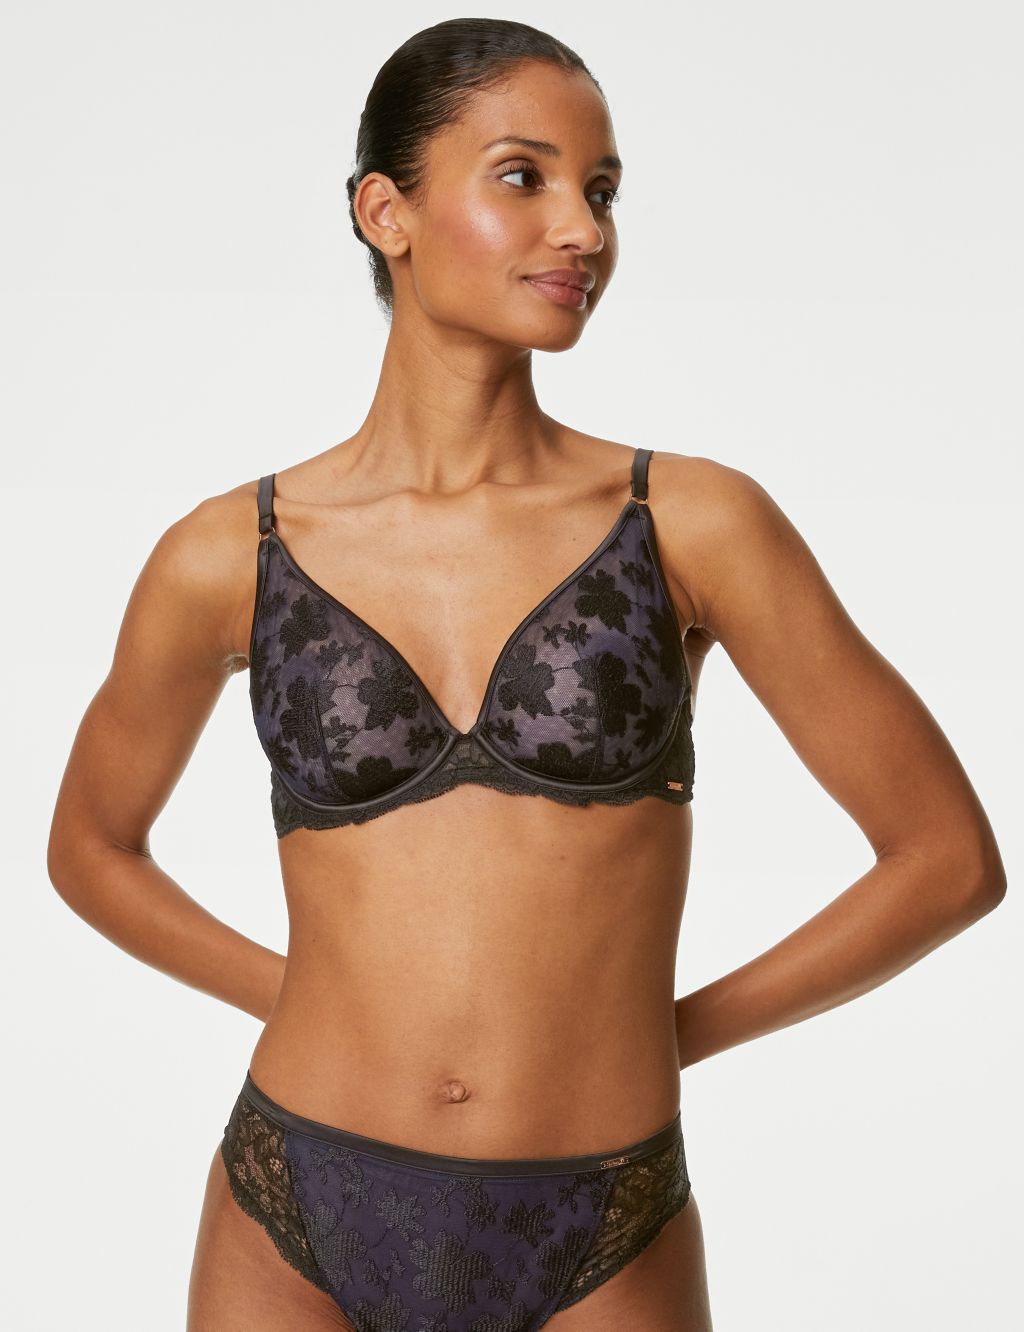 Cosmos Embroidery Wired Plunge Bra Set image 3